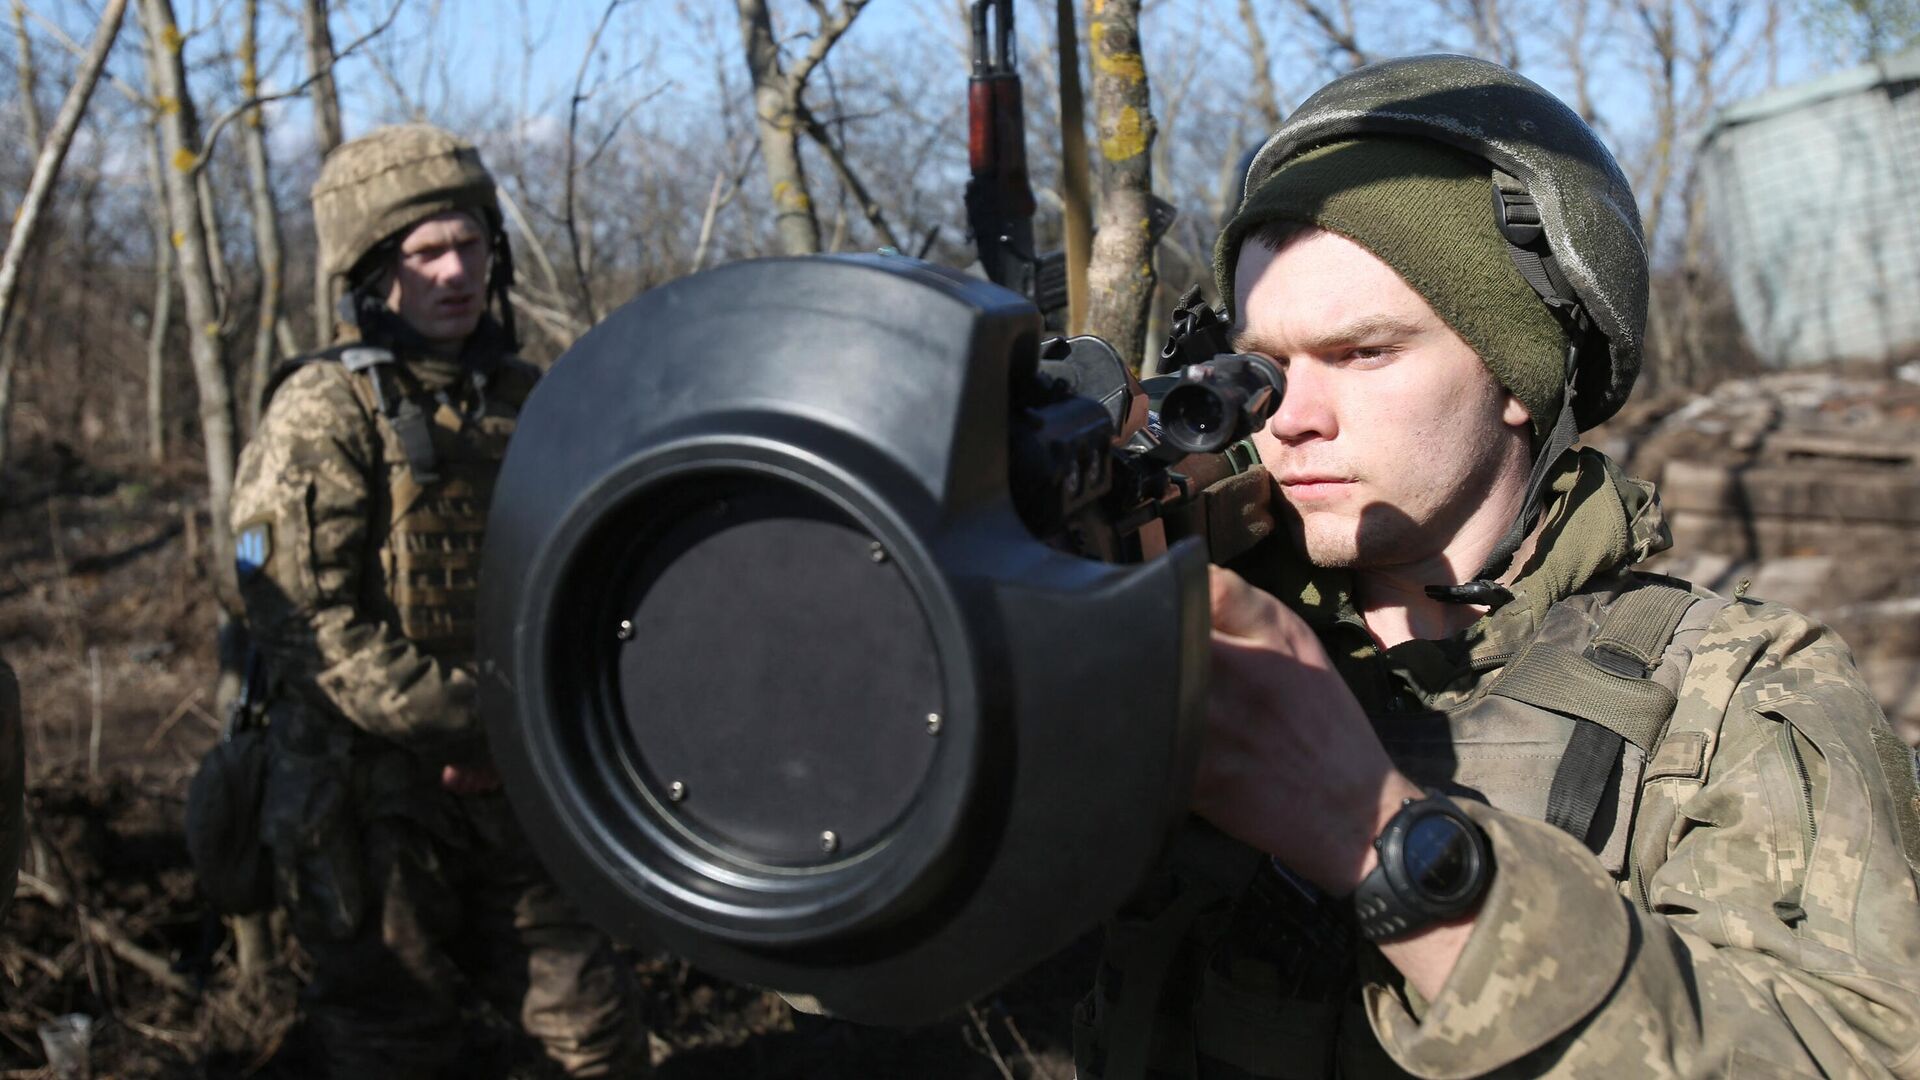 Servicemen of Ukrainian Military Forces on the front-line with Russia-backed separatists near Novognativka village, Donetsk region, examine a Swedish-British portable anti-tank guided missile NLAW that was transferred to the units as part of Britain's military-technical assistance, on February 21, 2022. (Photo by Anatolii STEPANOV / AFP) - Sputnik O‘zbekiston, 1920, 31.03.2022